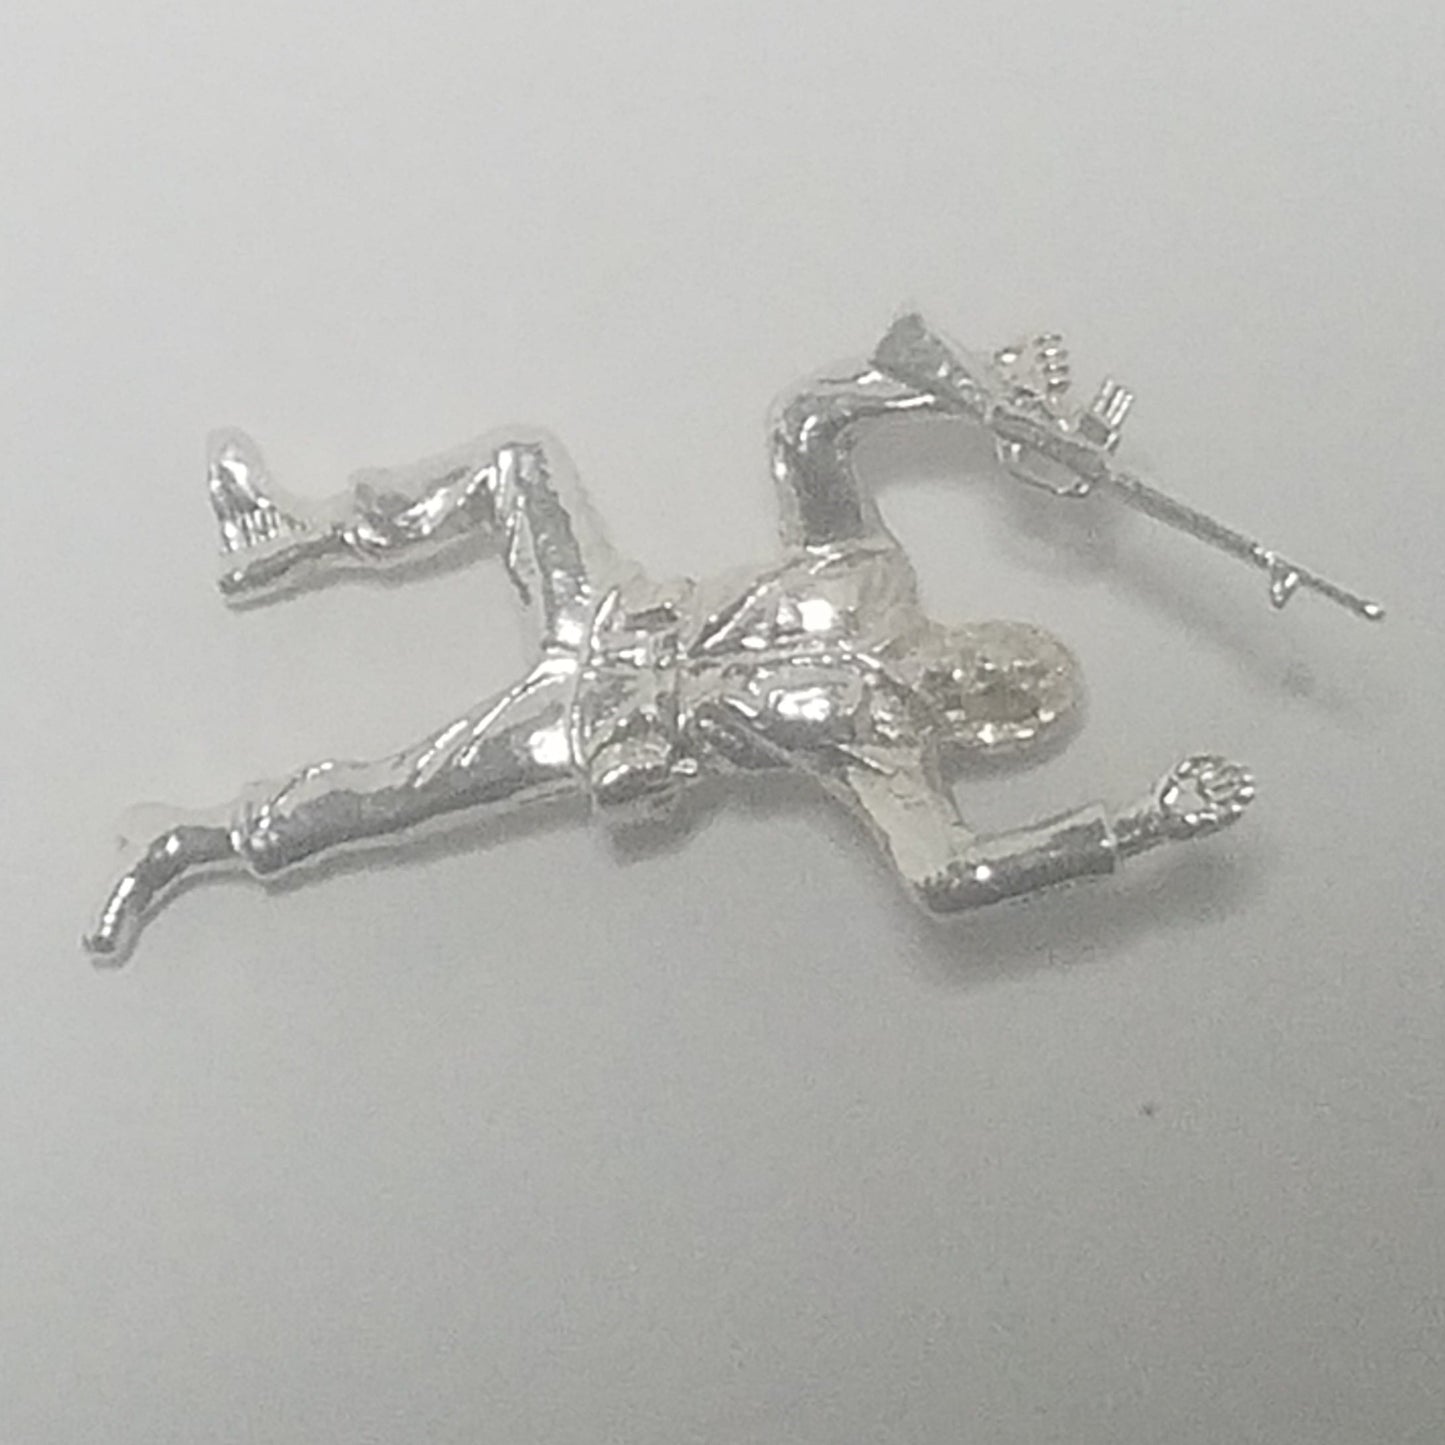 Classic Army Man Crawling 1.25 oz 999 Silver Hand Poured